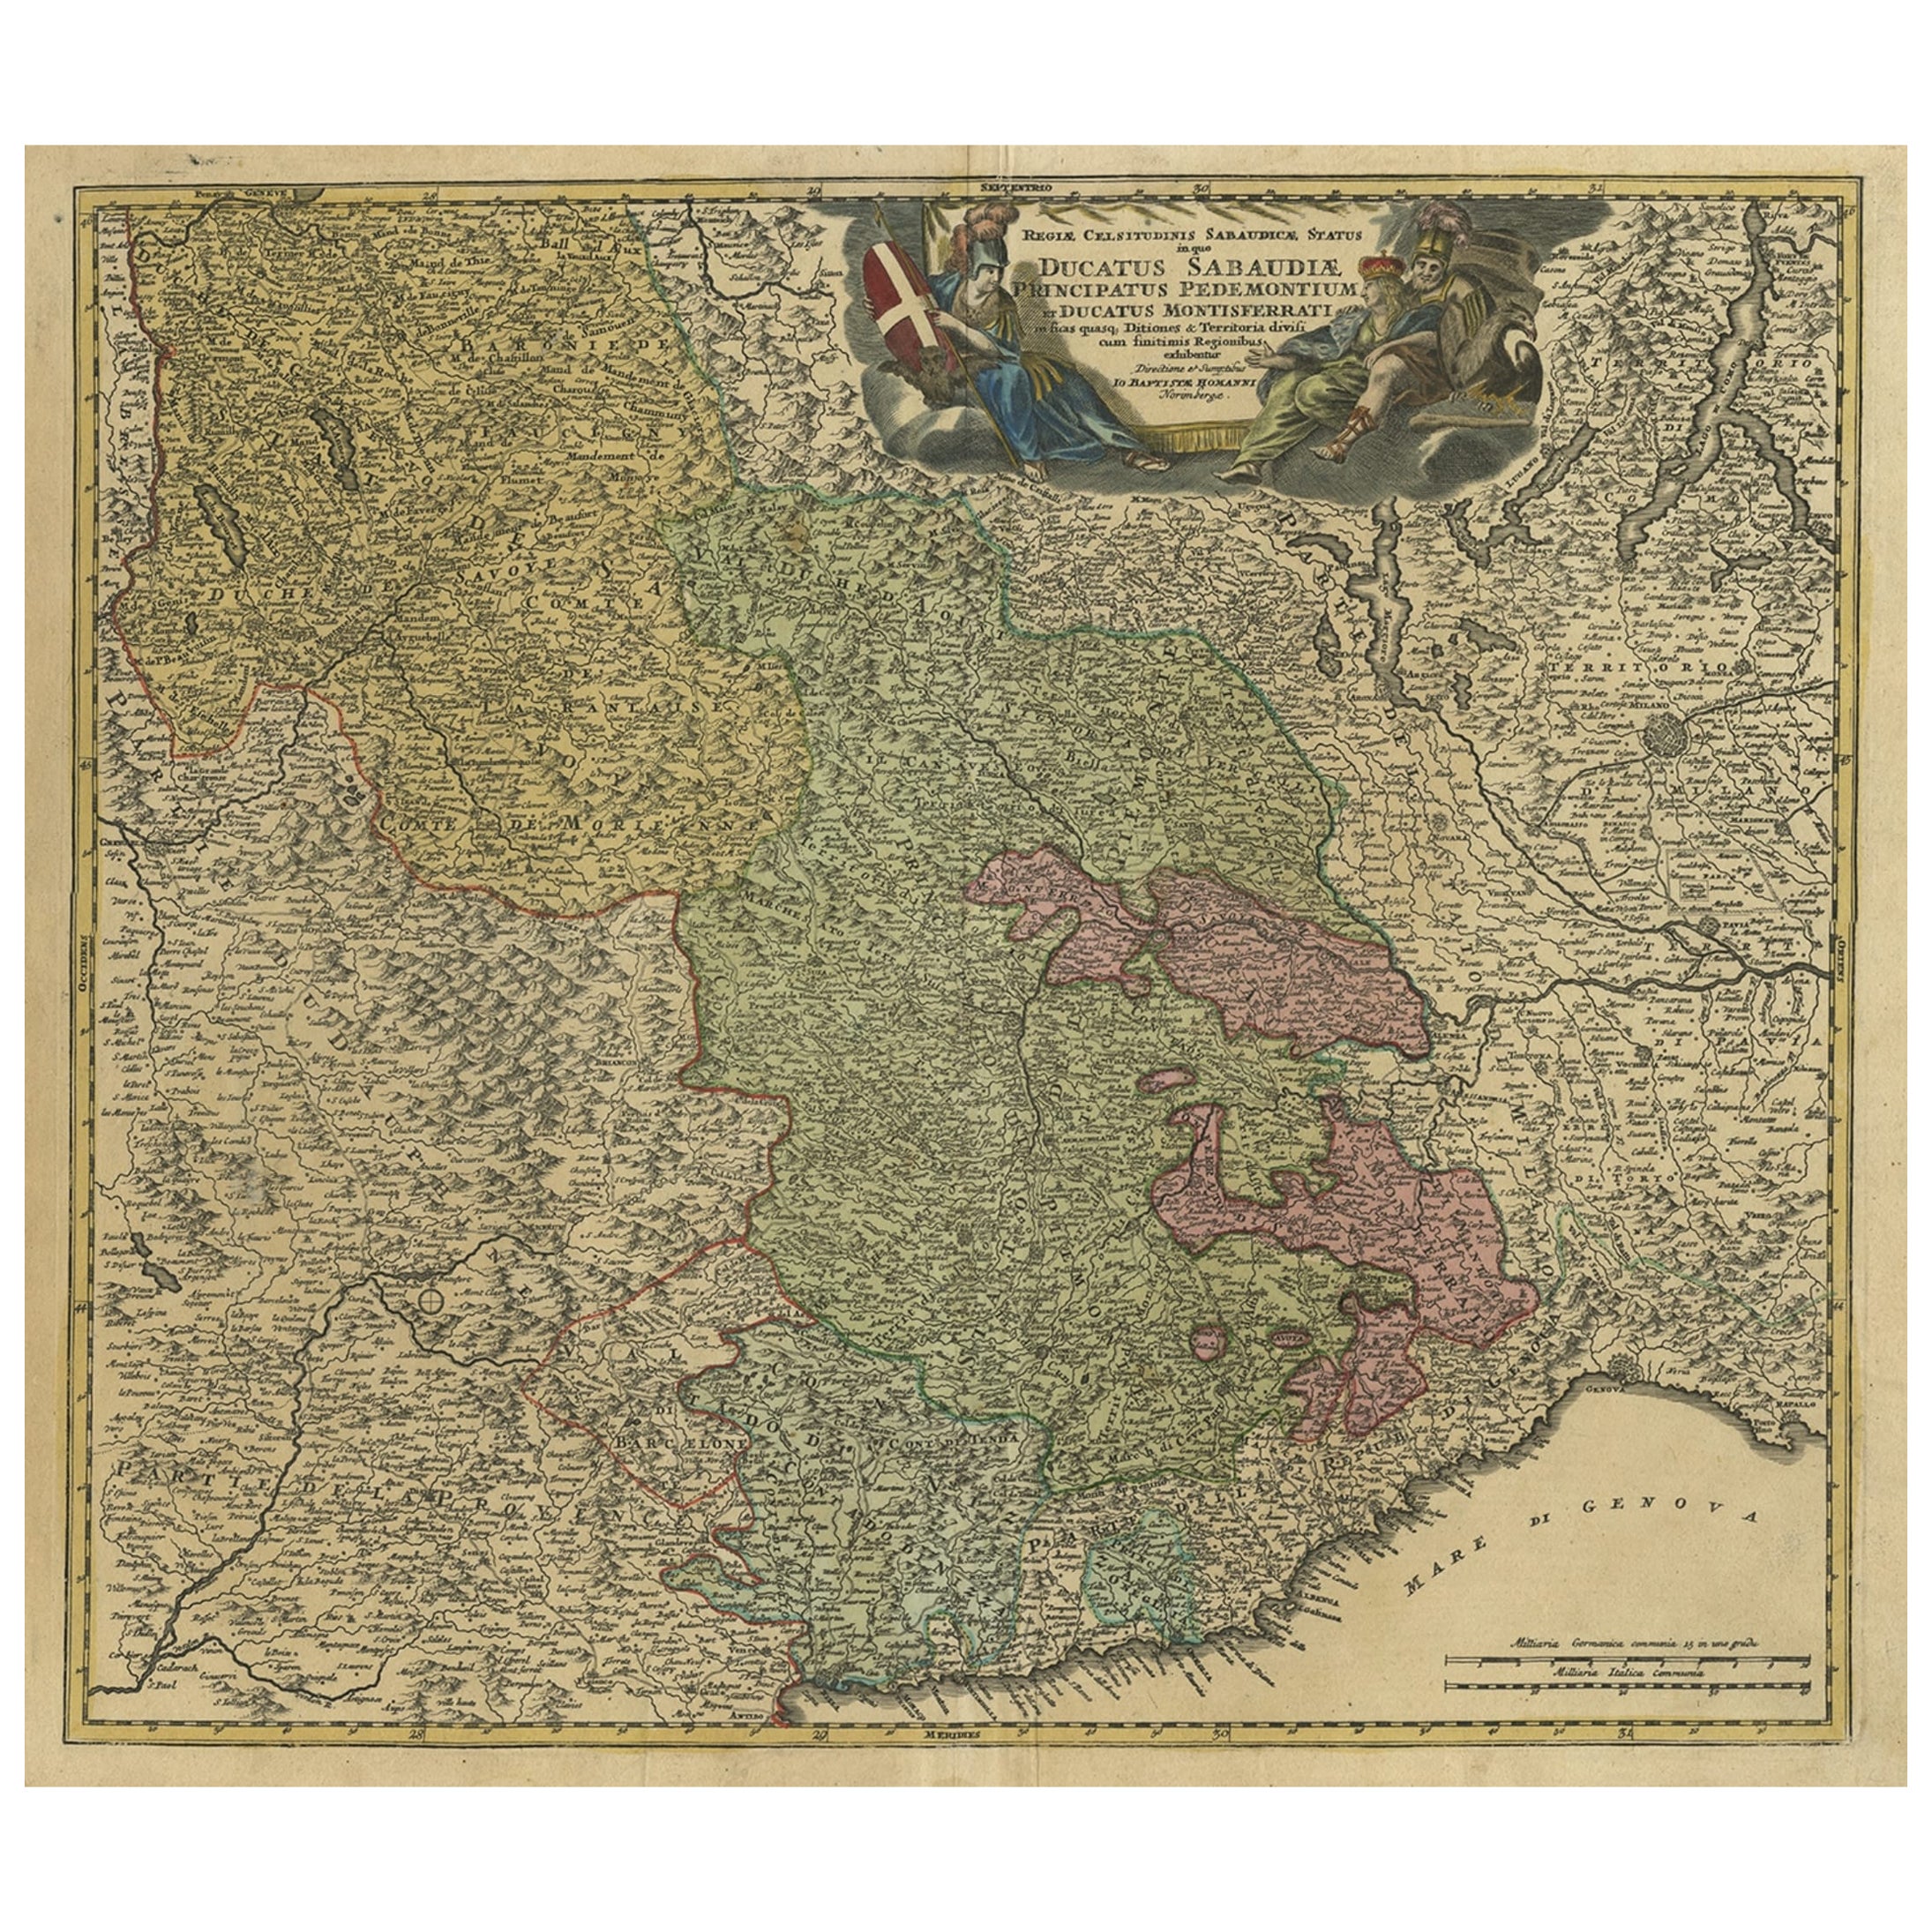 Antique Map of the Savoy and Piedmont Regions, Centered on Torino, ca.1735